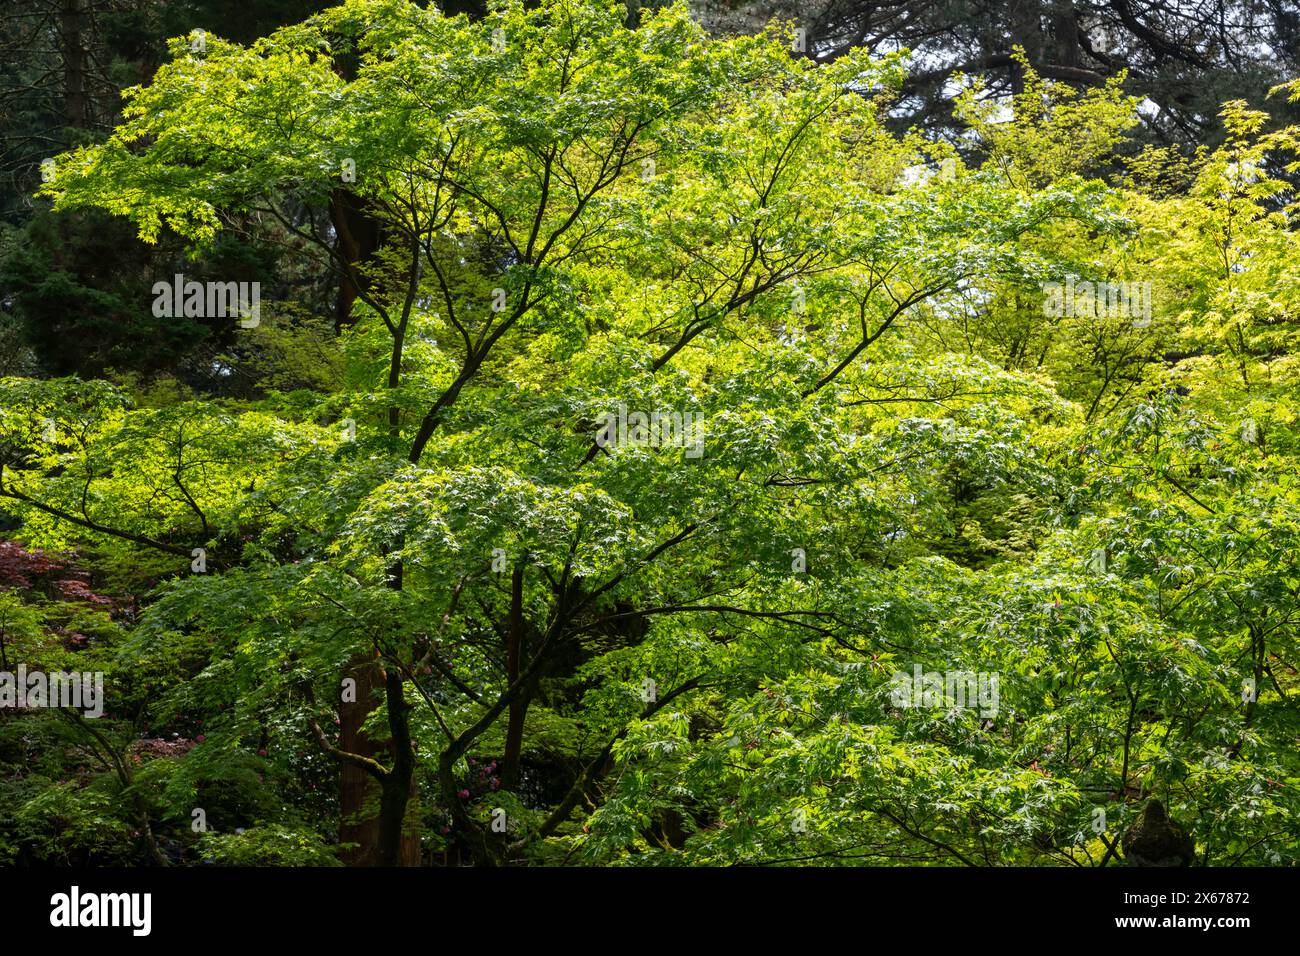 Spring sunlight making the new foliage of a Japanese Acer with pale green leaves glow. Stock Photo